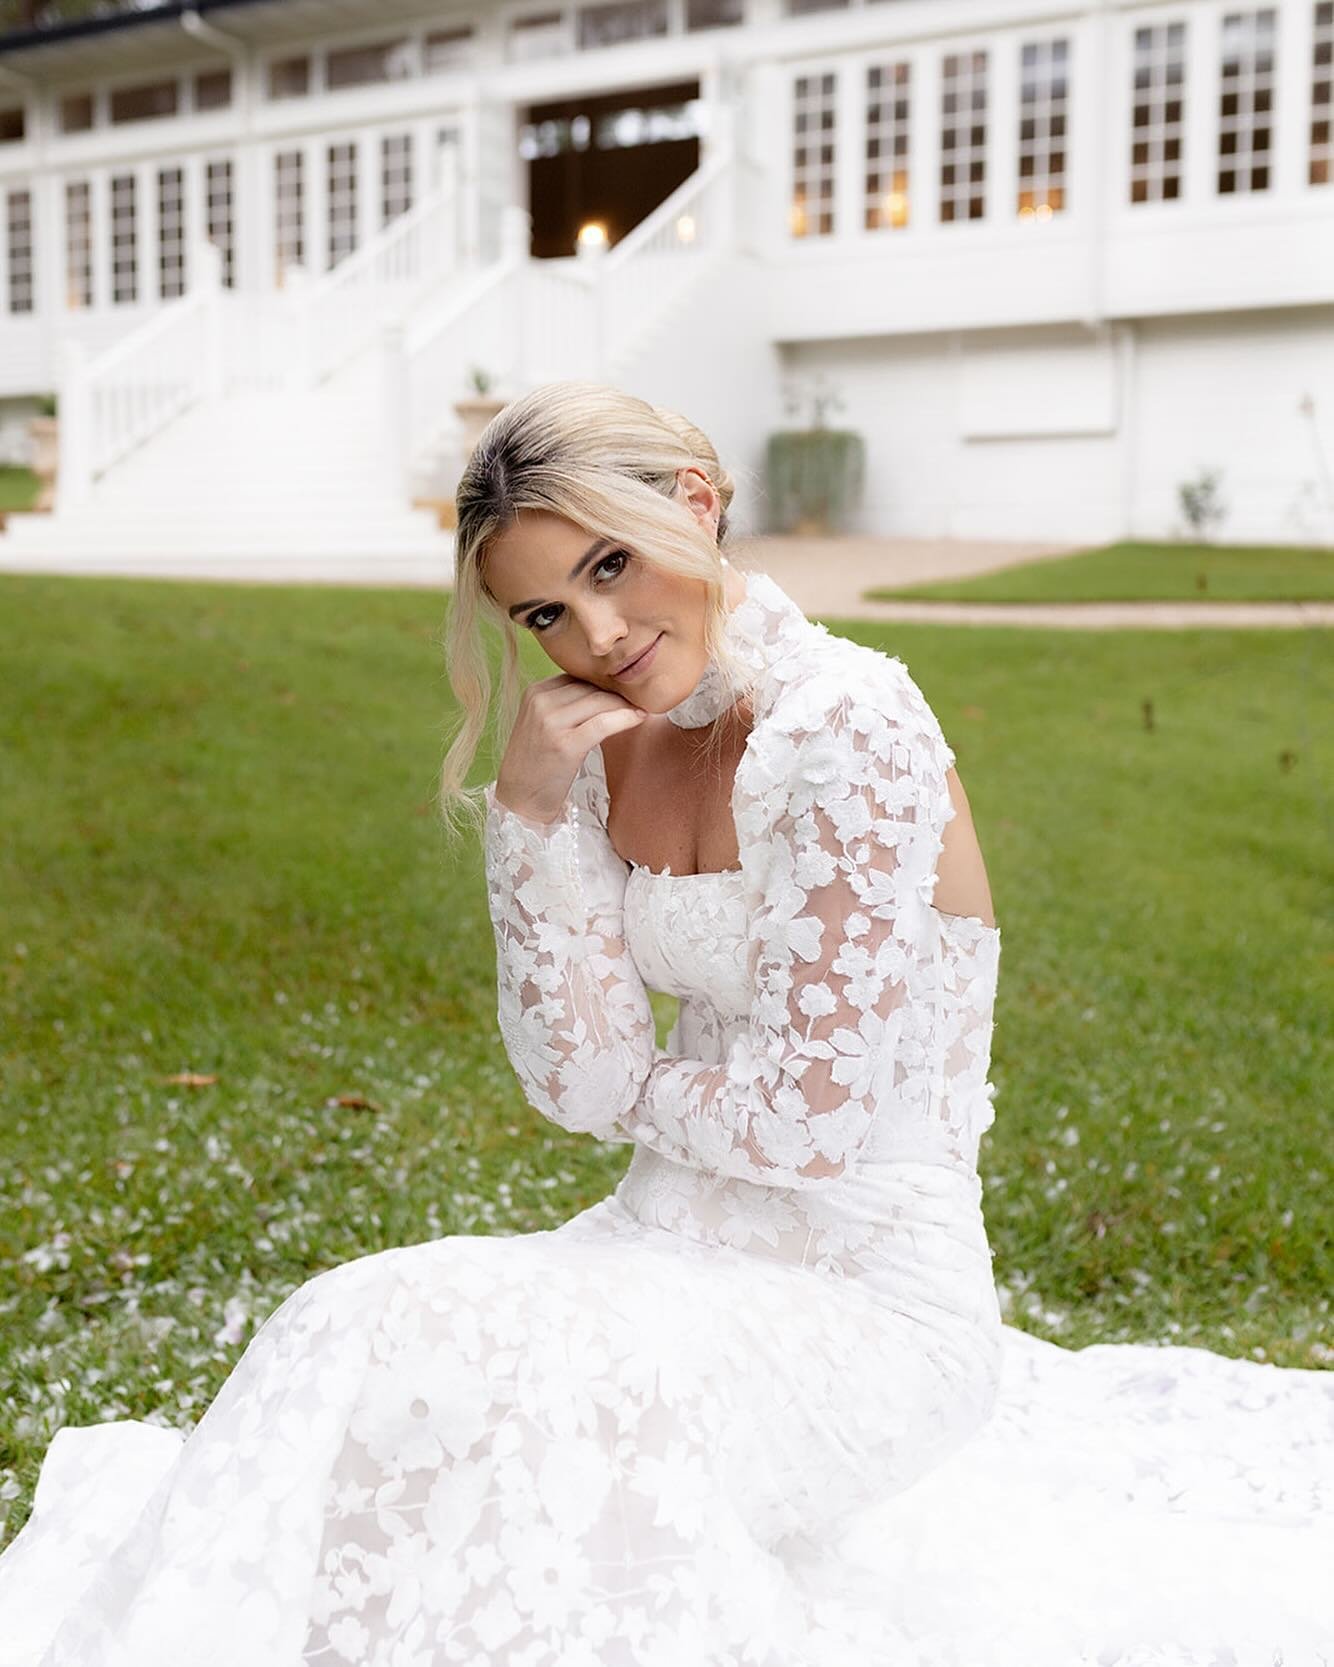 Kwila Lodge is the perfect backdrop for you to style in your own way that matches your love story 🤍

@ourheritageandco
@etremarie.bridal
@jacara_bridal
@lunadelilahbride
@tamika_hair_makeup
@sabisoirees
@taylastockwell
@svh.media

#kwilalodge #kwila